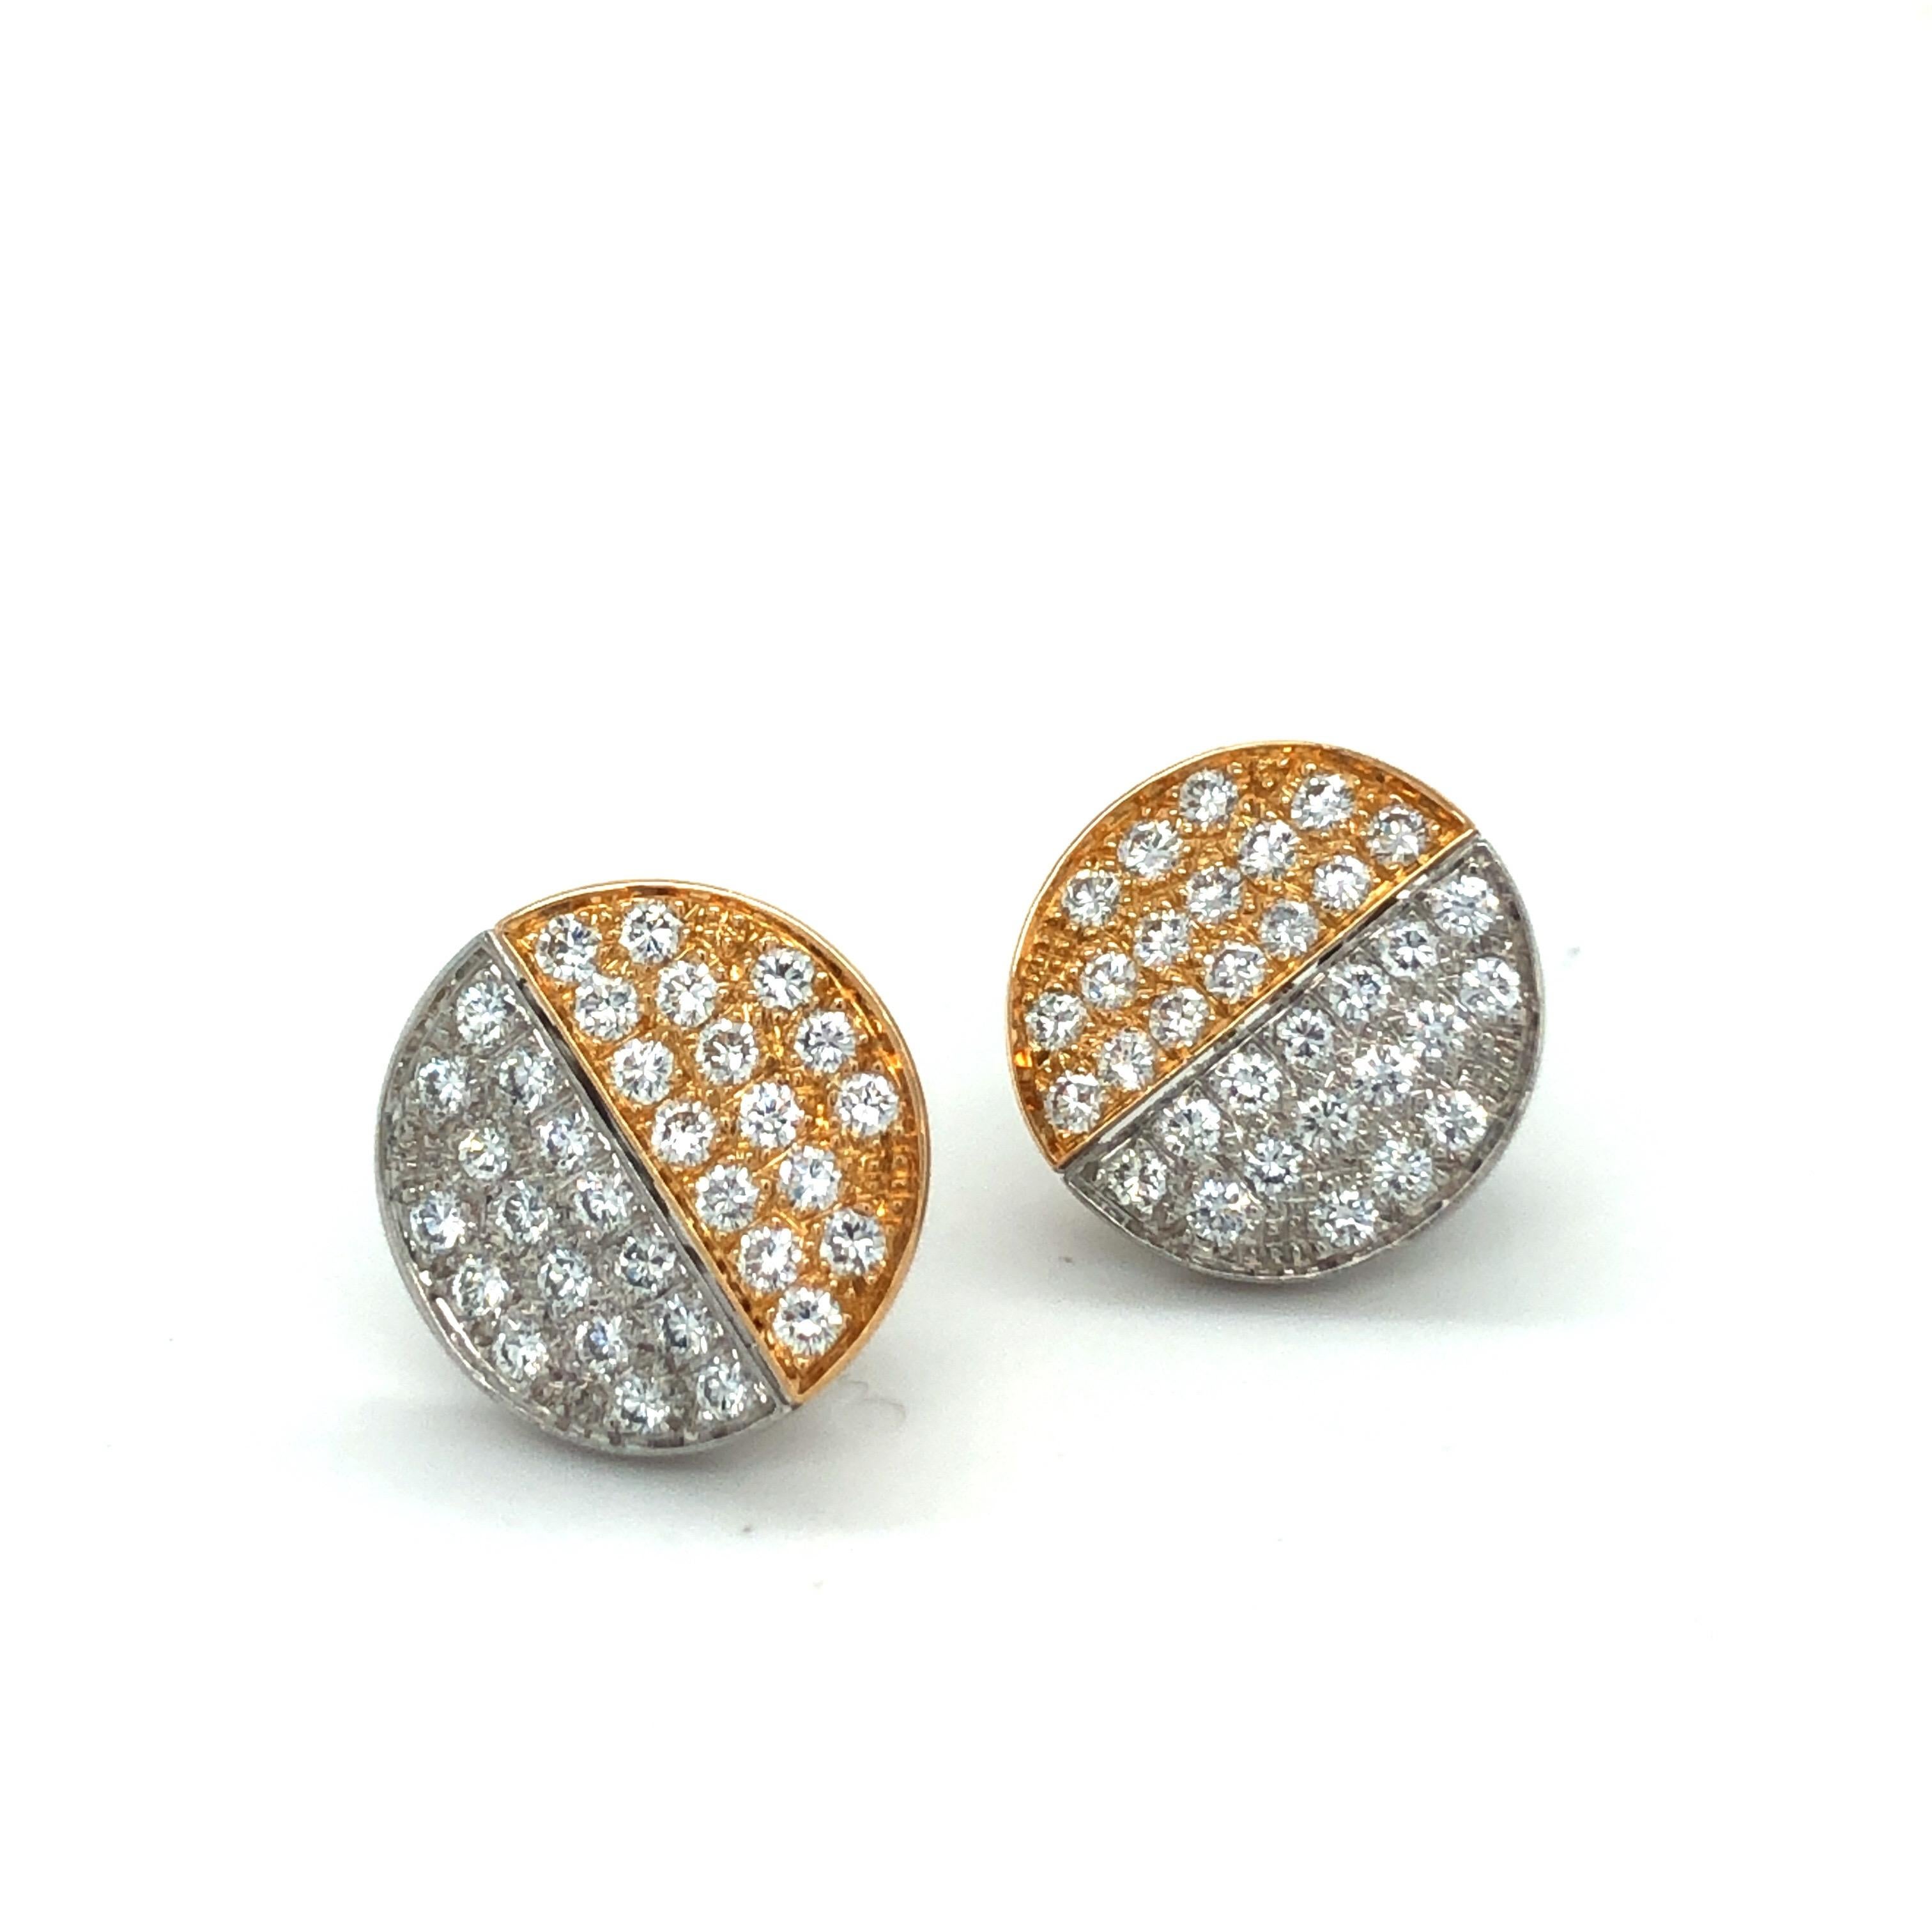 Elegant 18 karat bi-color gold and round-cut diamonds ear clips by Paul Binder.
Designed as bevelled discs with one half crafted in white gold and one in rose gold and pavé-set with 64 brilliant-cut diamonds totalling circa 2 carats. Clipsystem,